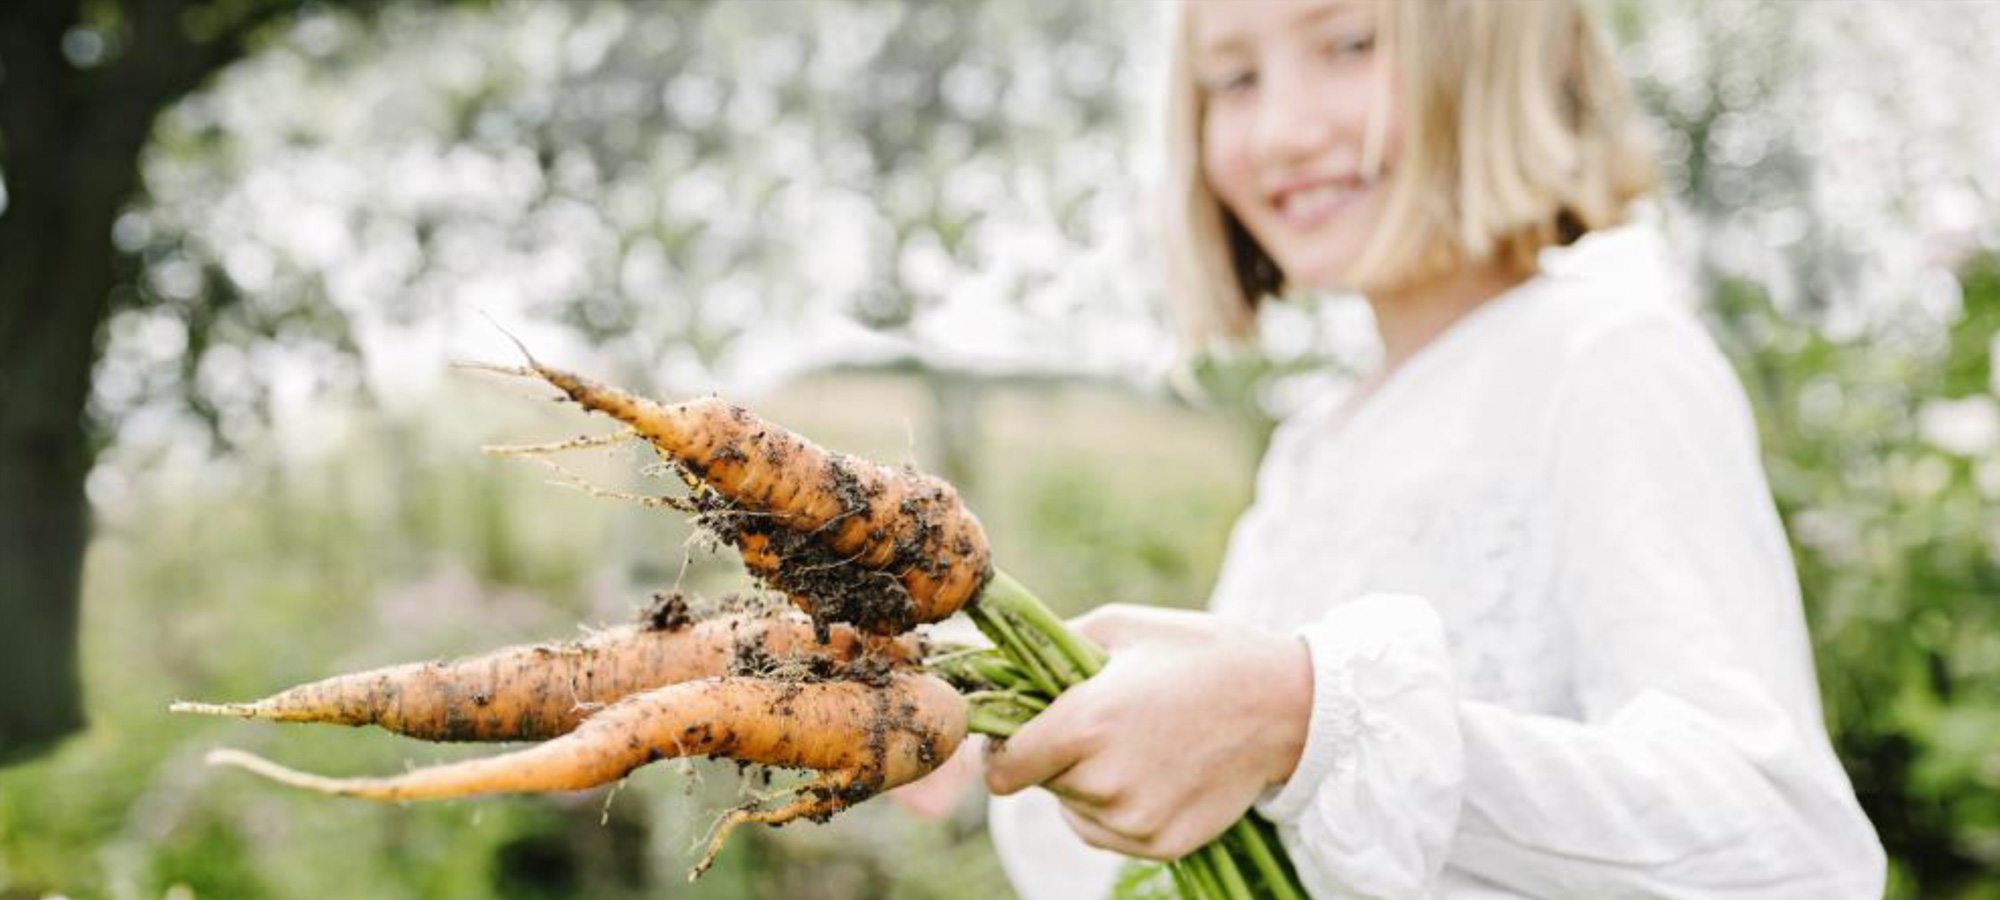 girl-with-carrots-from-the earth